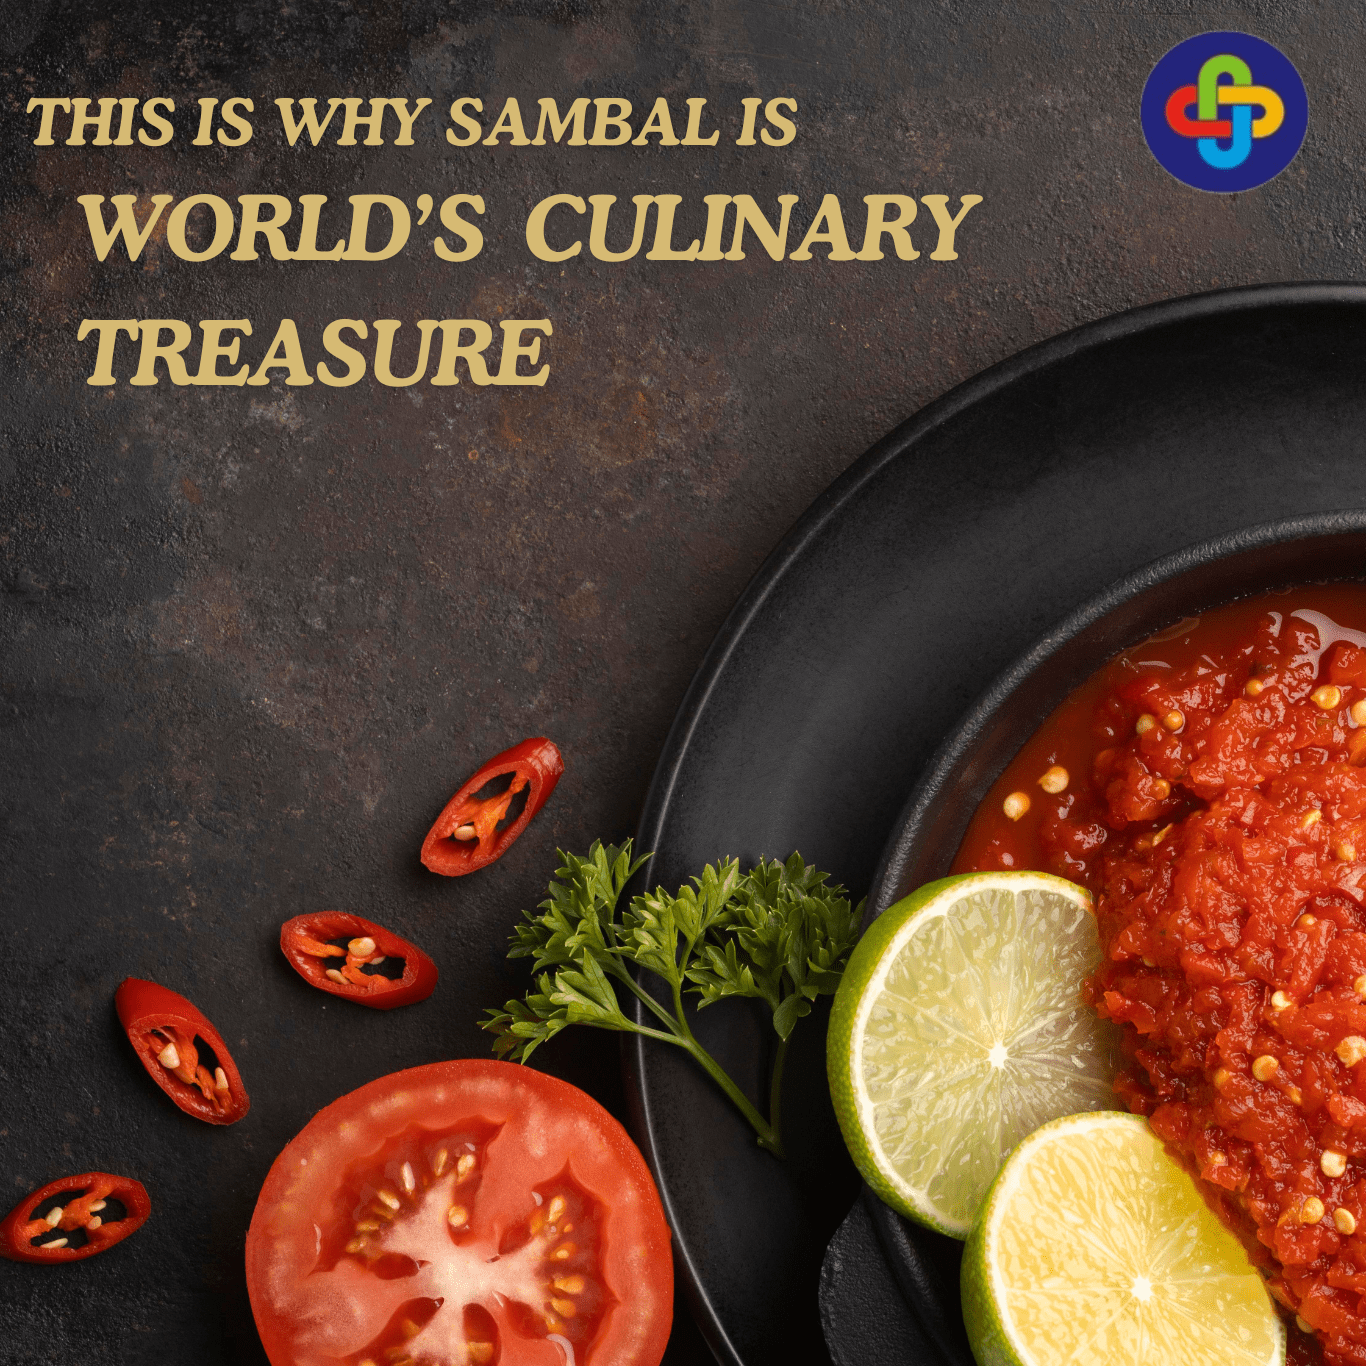  This is Why Sambal is World’s Culinary Treasure